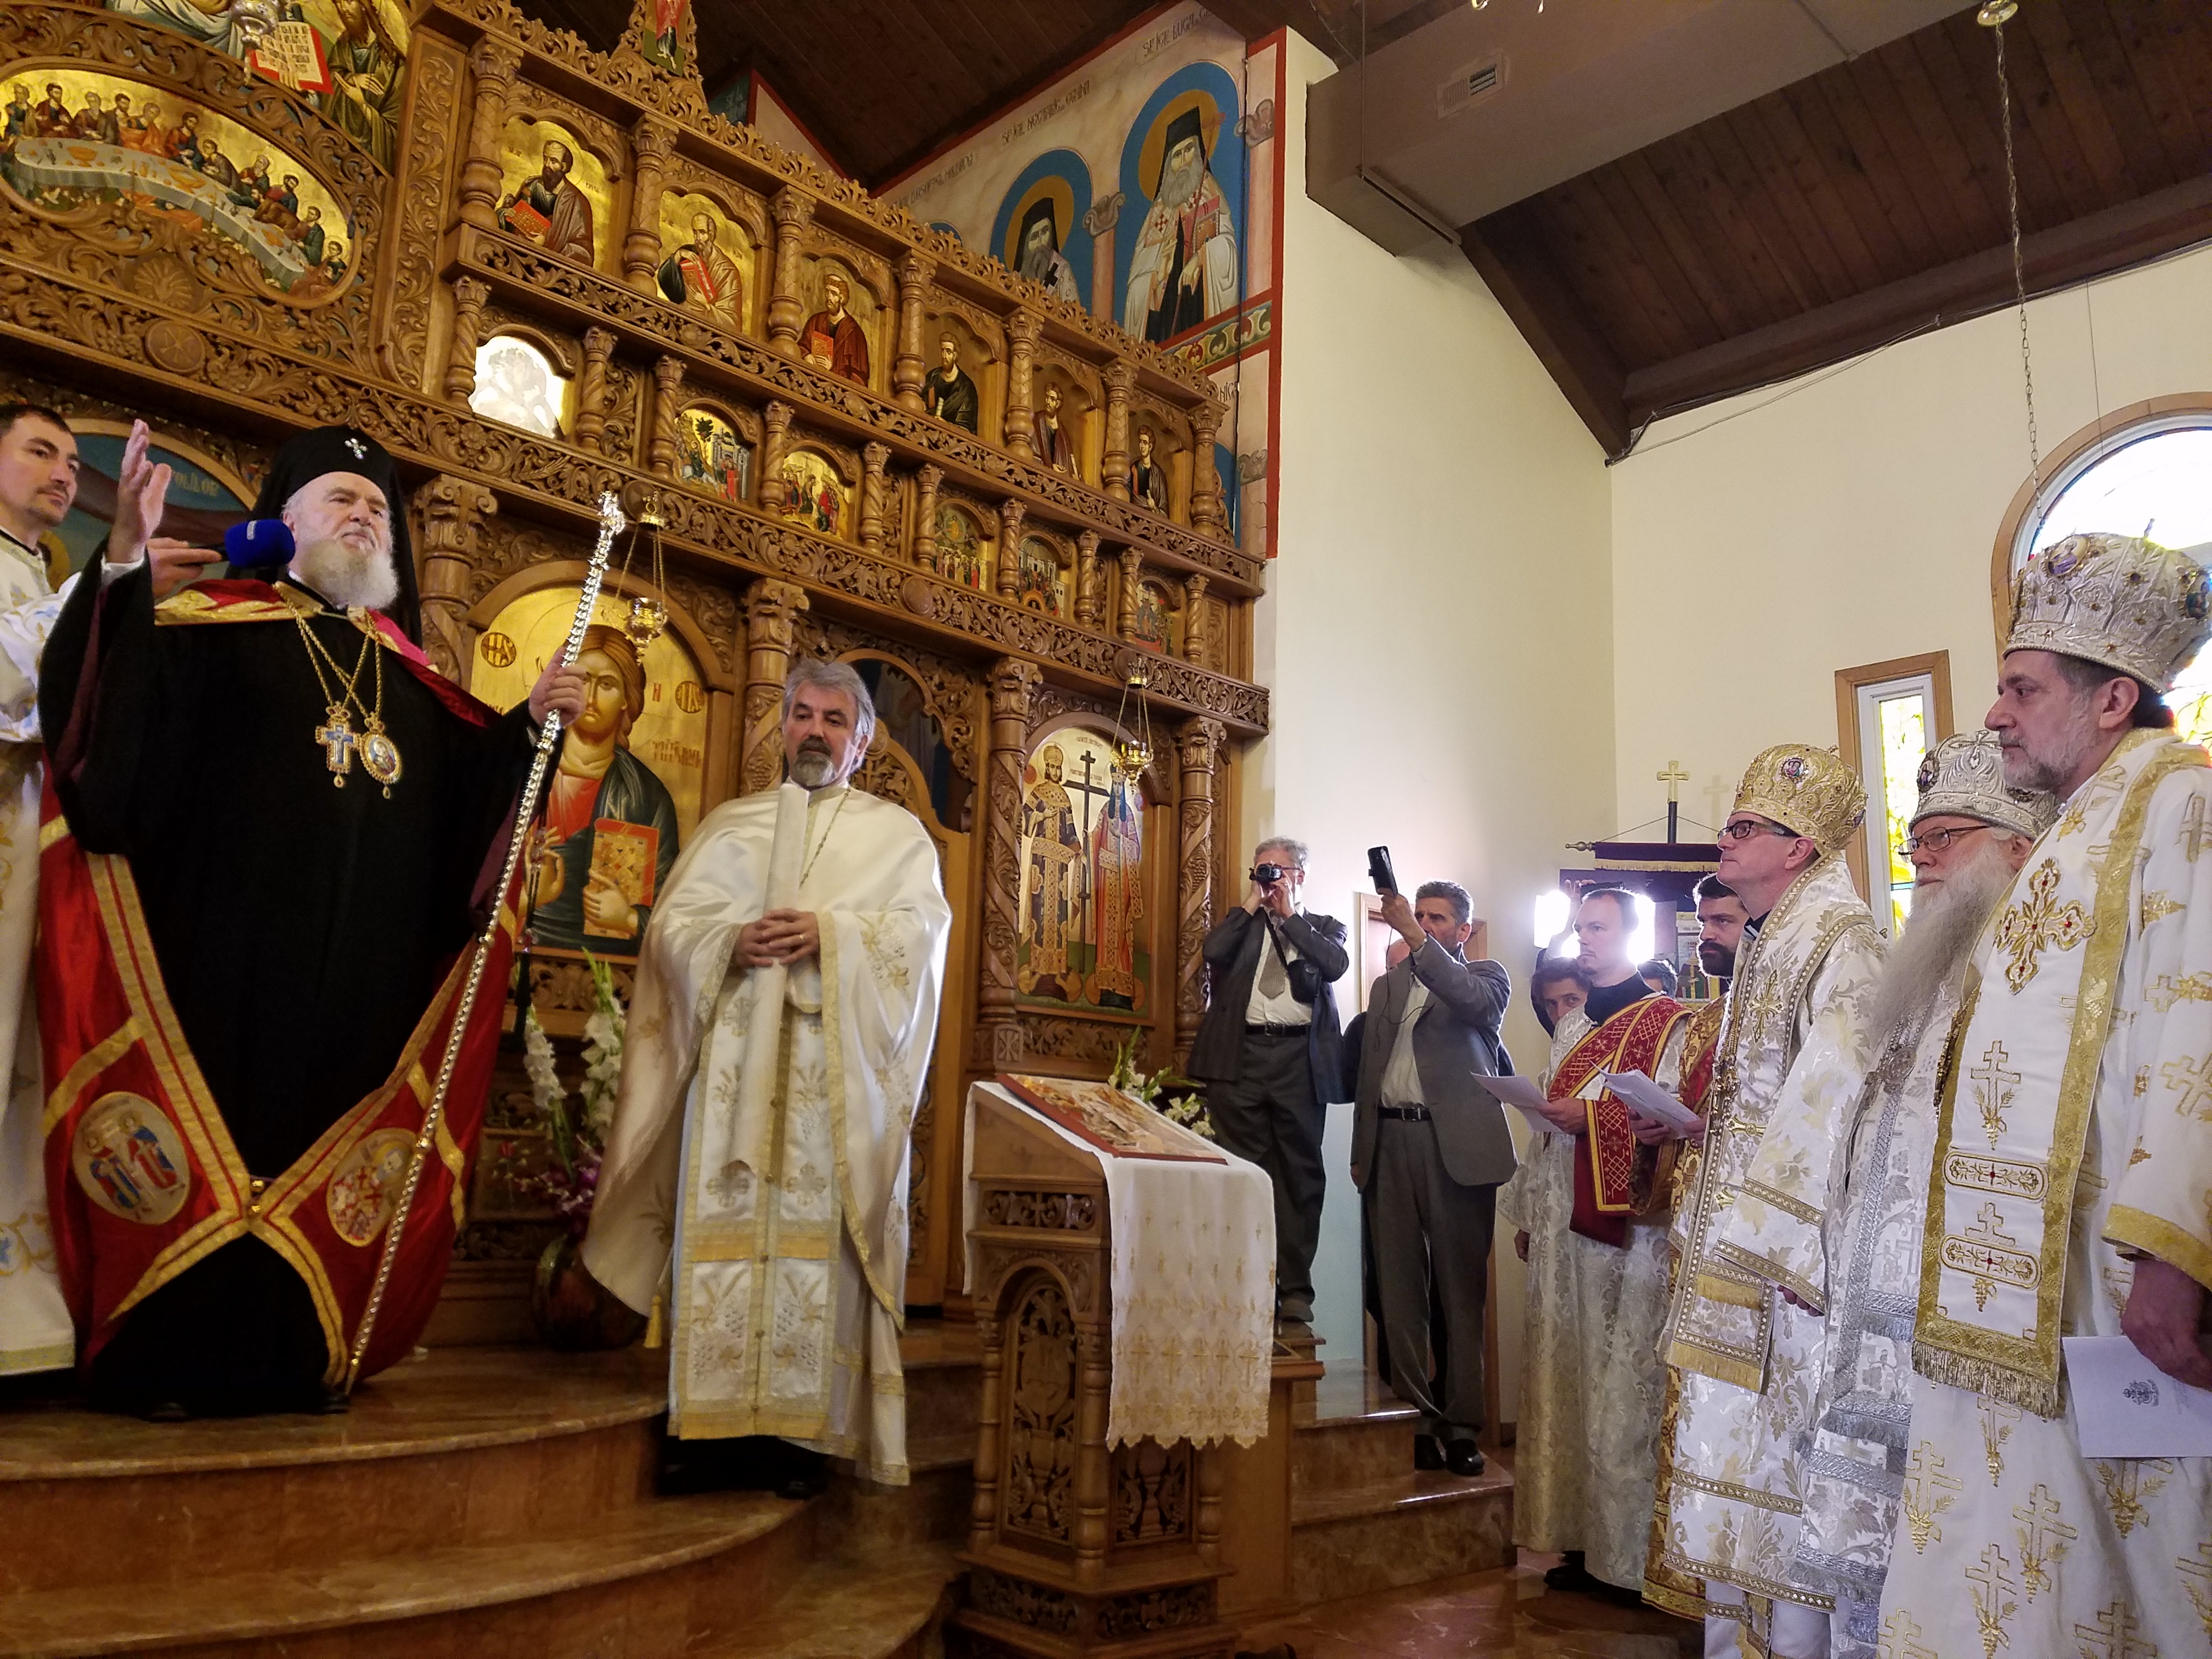 NEW ROMANIAN ORTHODOX METROPOLIA OF THE UNITED STATES HOLD ENTHRONEMENT CEREMONY